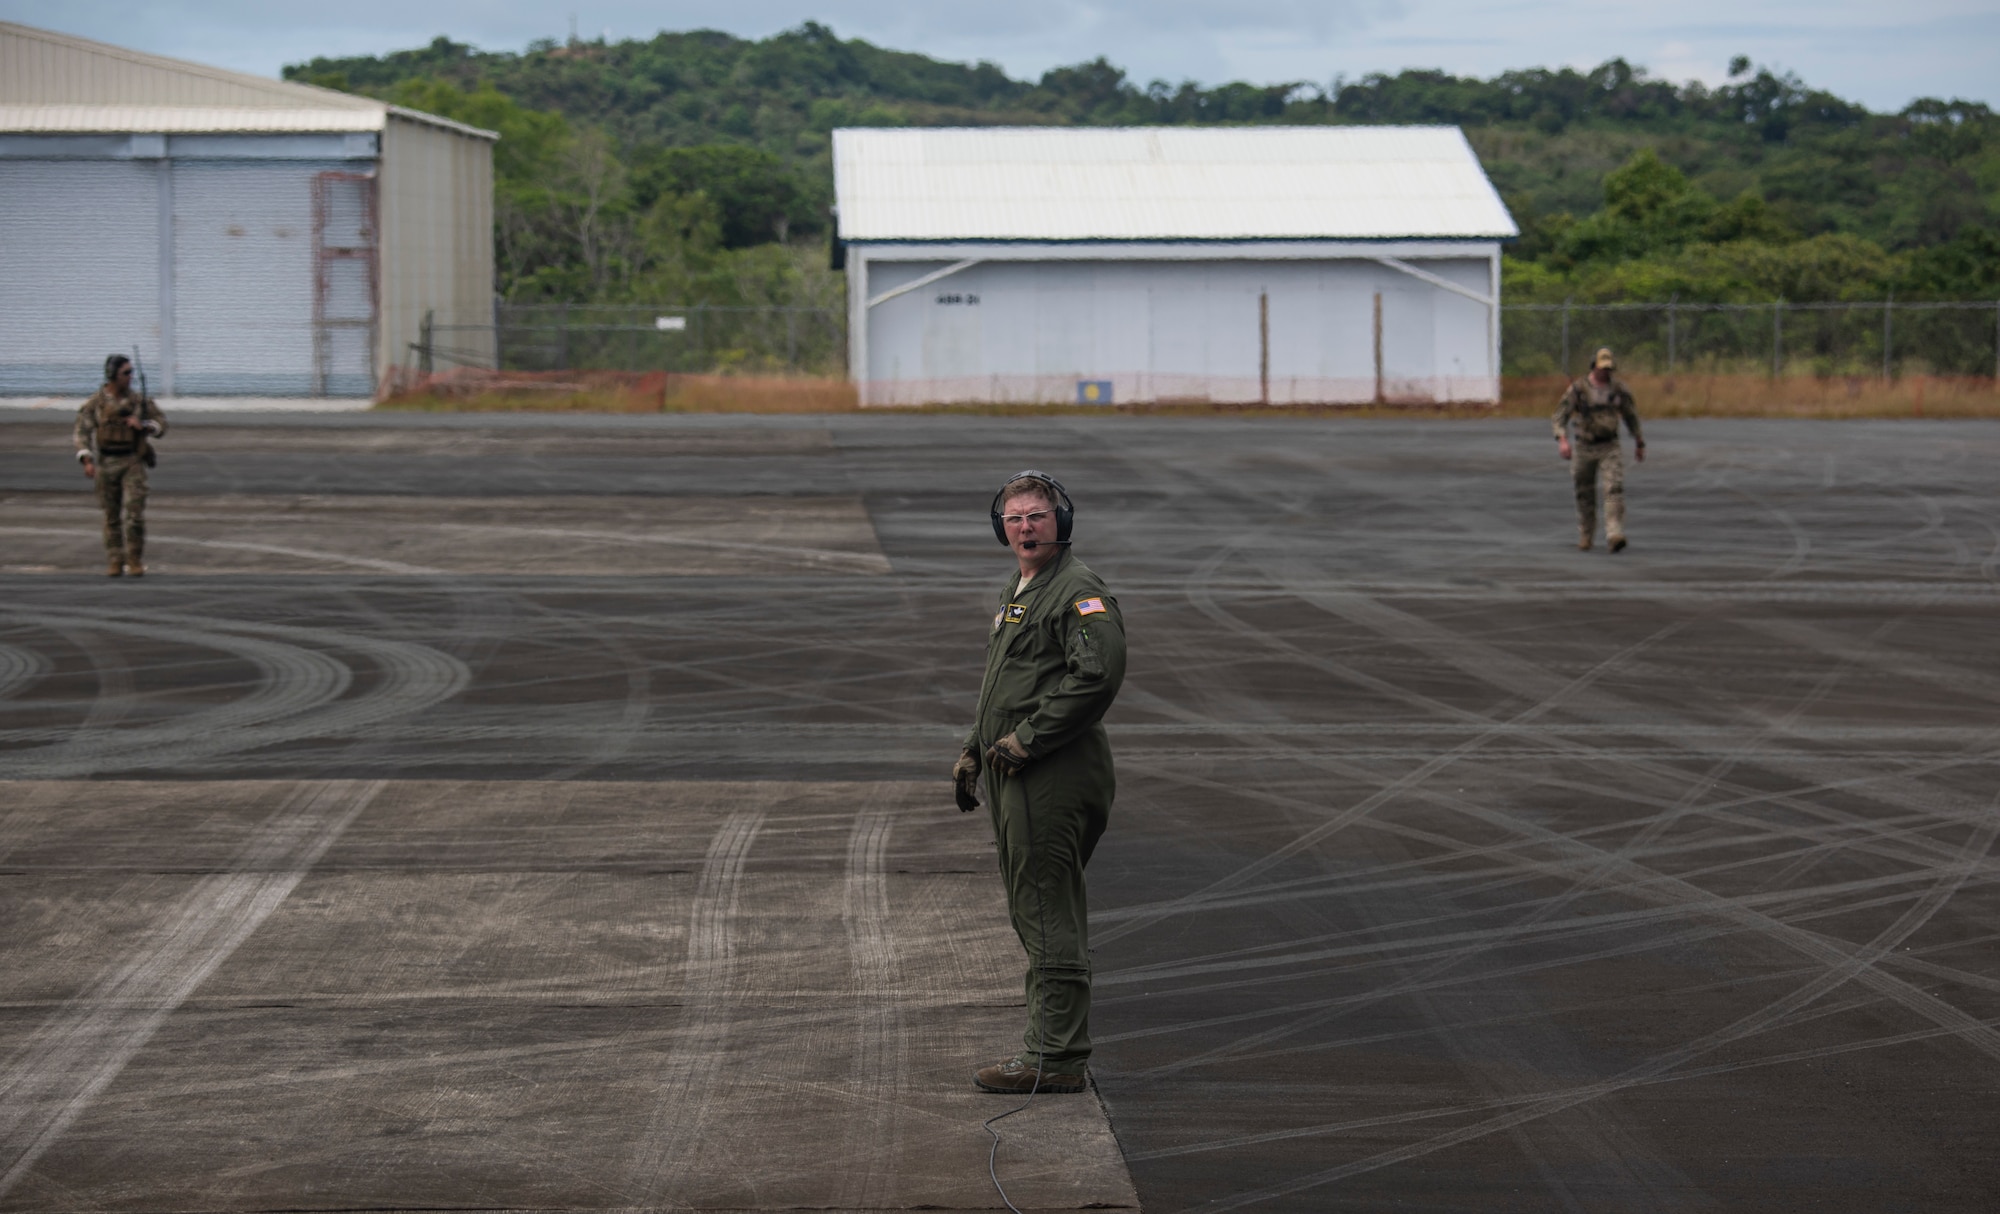 U.S. Chief Master Sgt. Lester Farley, a loadmaster assigned to the 36th Airlift Squadron, Yokota Air Base, Japan, calls in two 736th Security Forces Airmen from a security perimeter before takeoff at Palau International Airport, Palau, during a Dynamic Force Employment, Nov. 23, 2020. DFE is an operational platform that allows our forces to be strategically predictable and operationally unpredictable. The U.S. Air Force is postured and ready to respond to crises and contingencies throughout the U.S. Indo-Pacific Command, contributing to regional stability and a free and open Indo-Pacific. (U.S. Air Force photo by Senior Airman Michael S. Murphy)